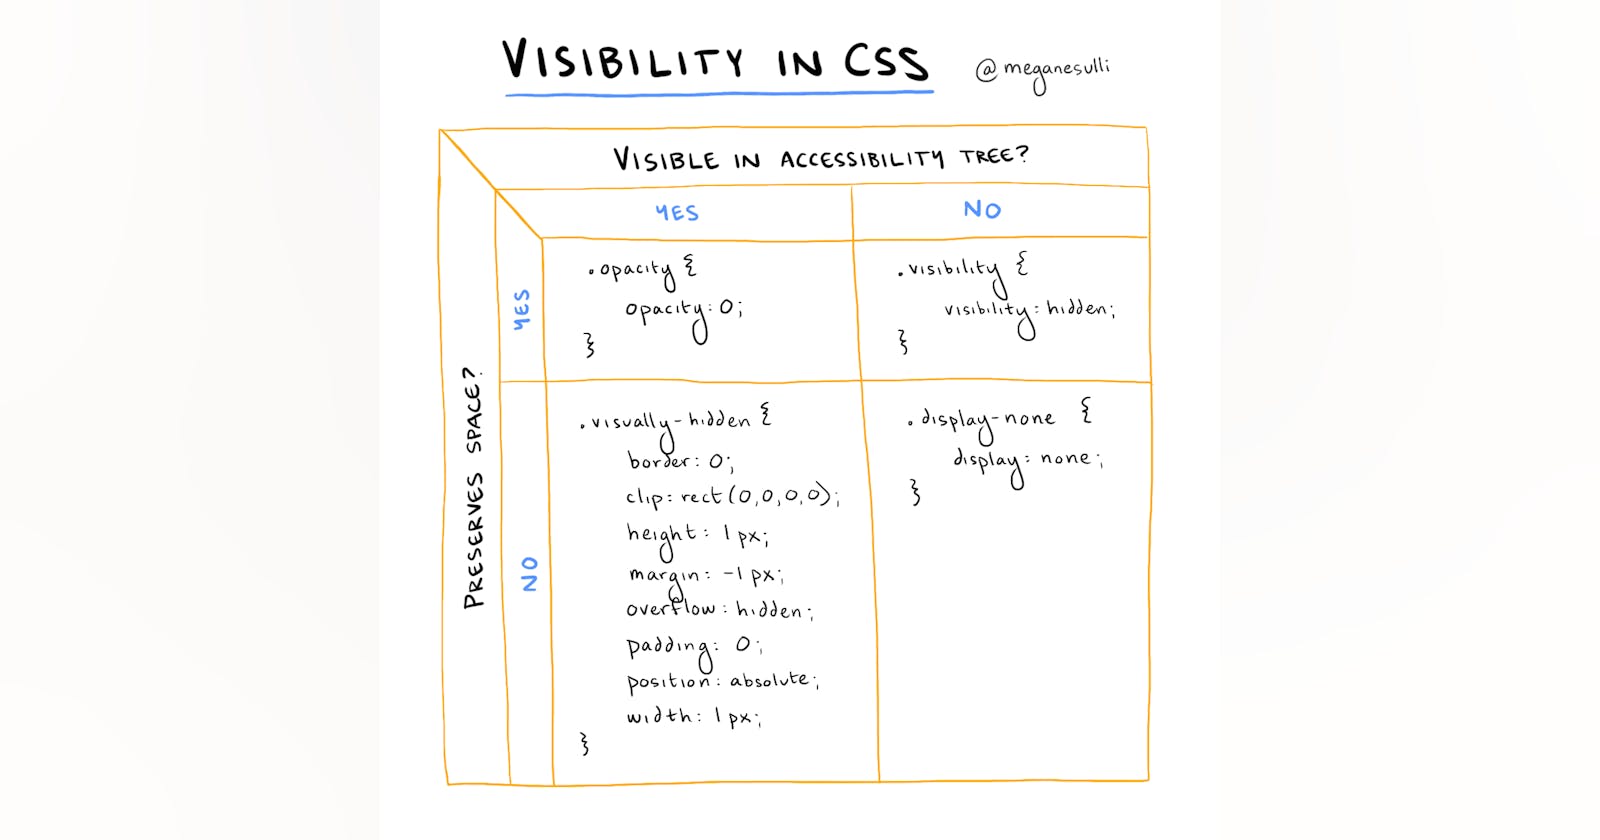 [Sketchnote] Visibility in CSS